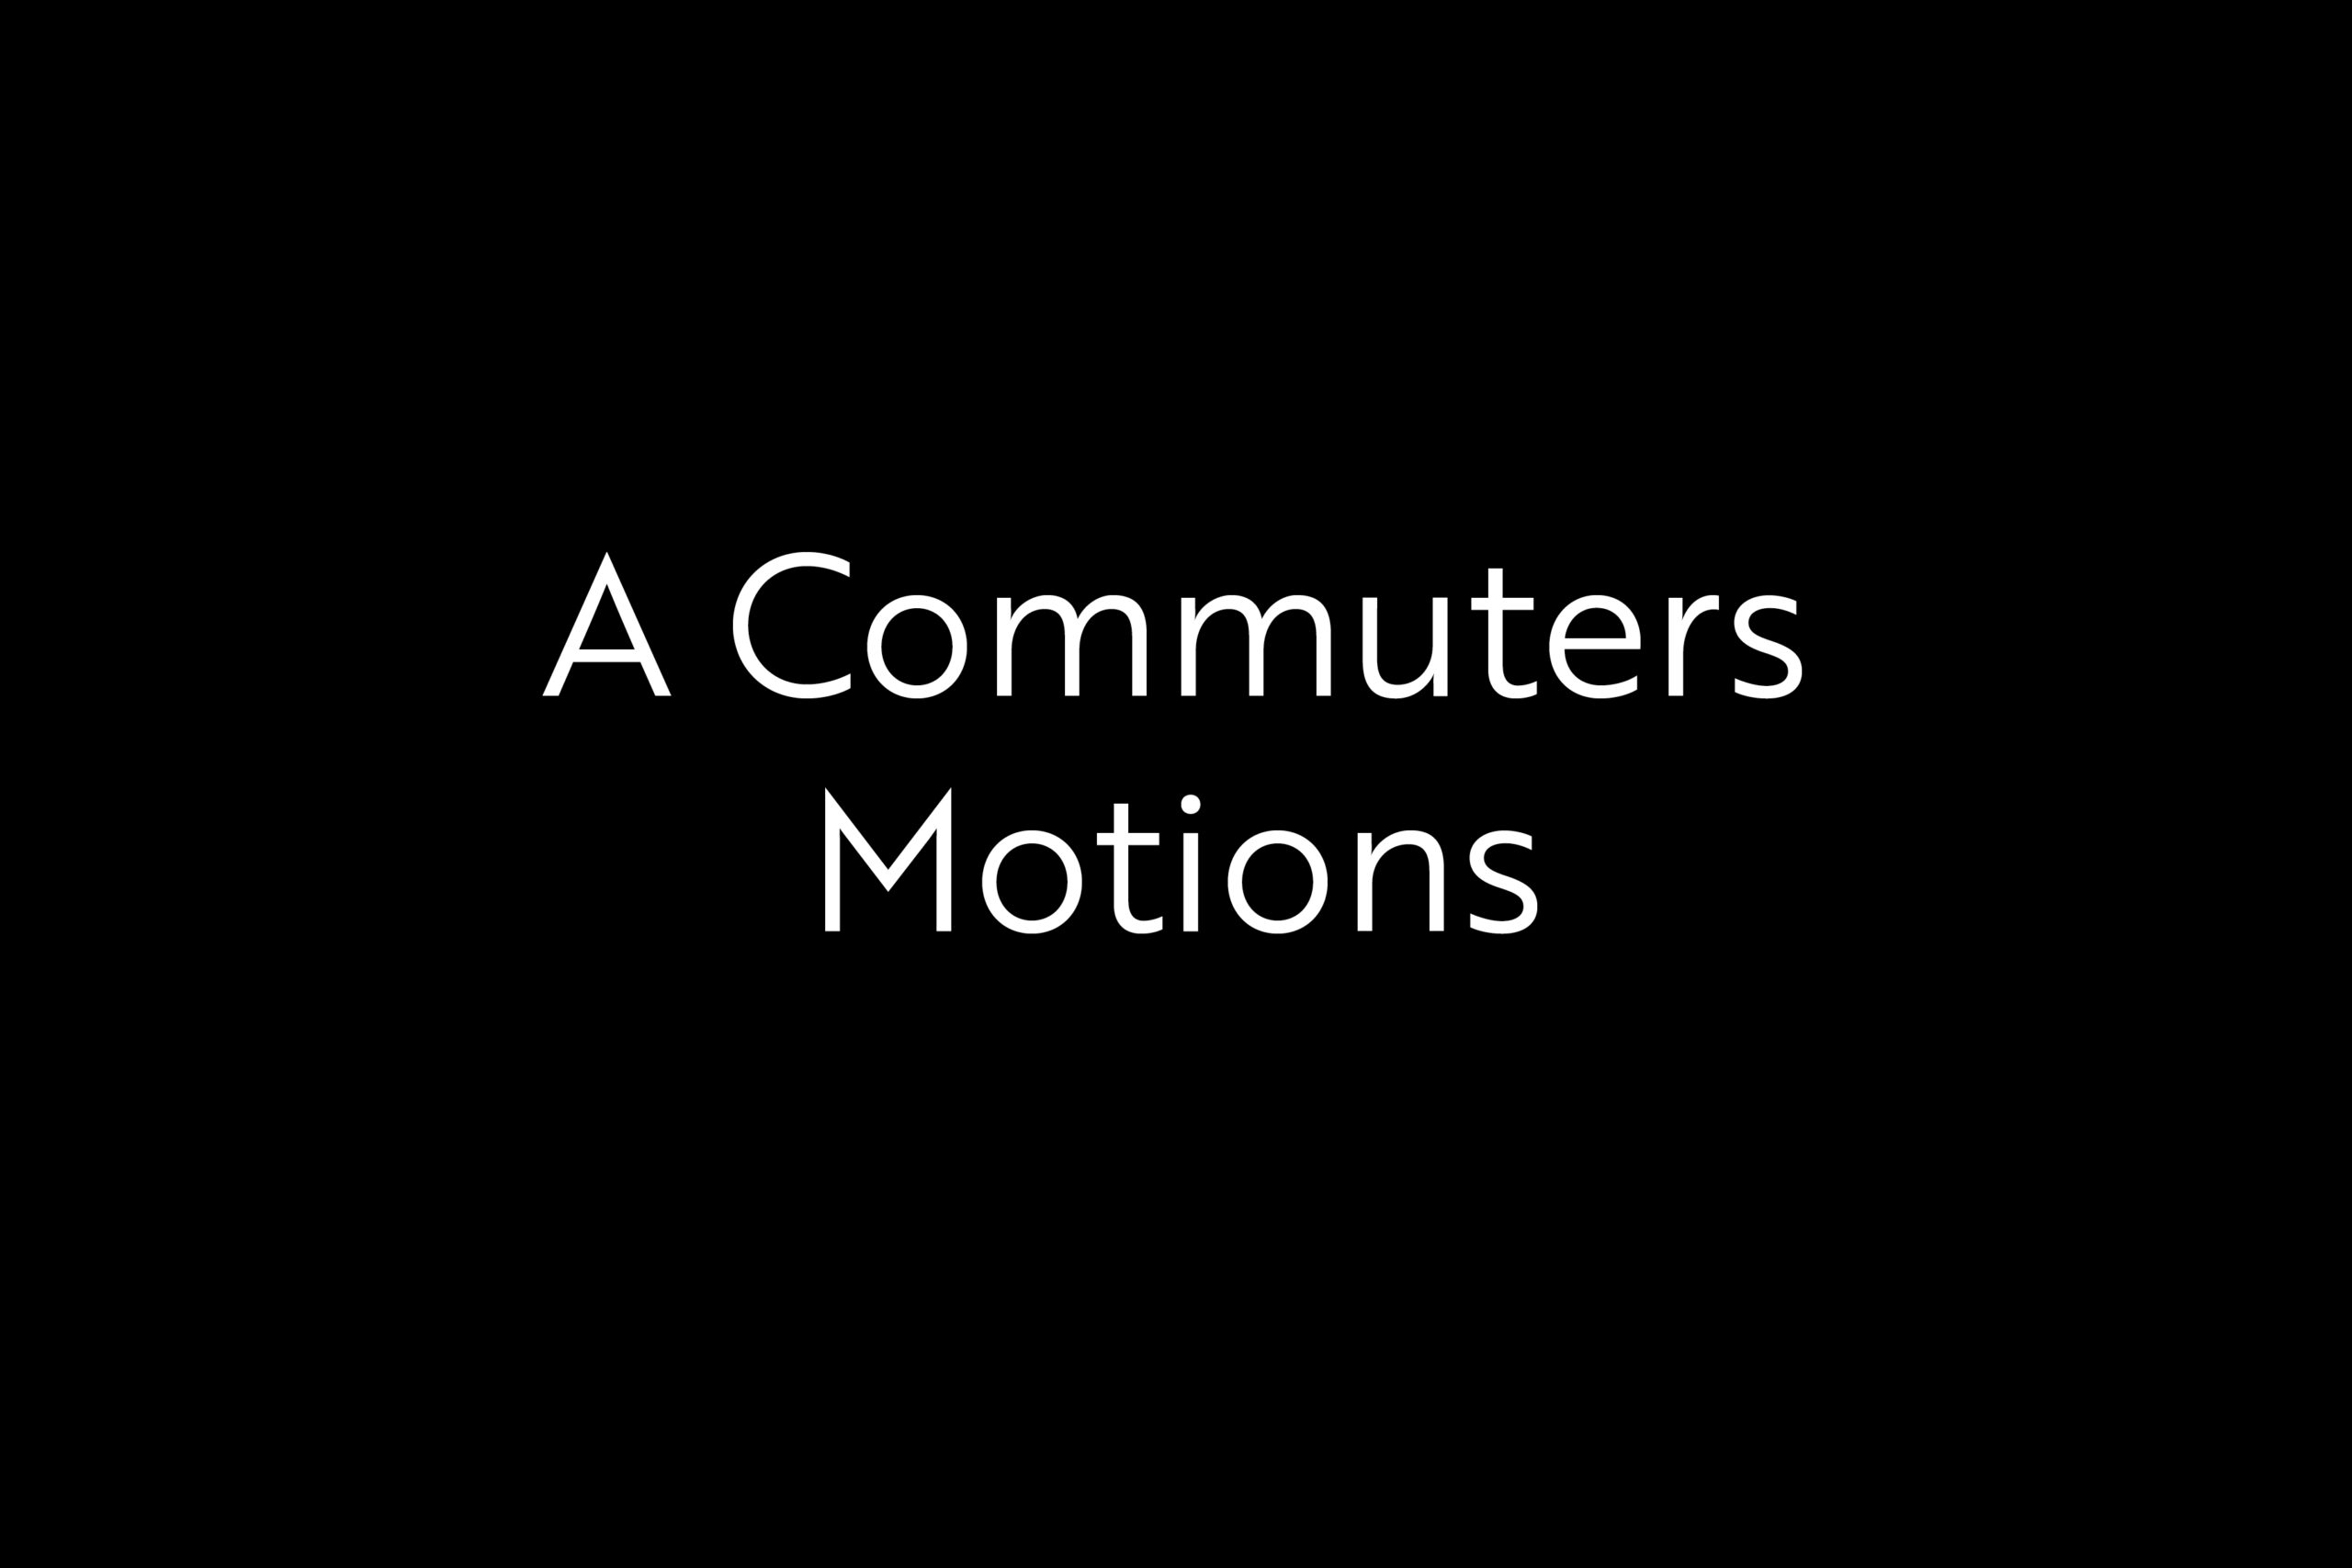 A Commuters Motions